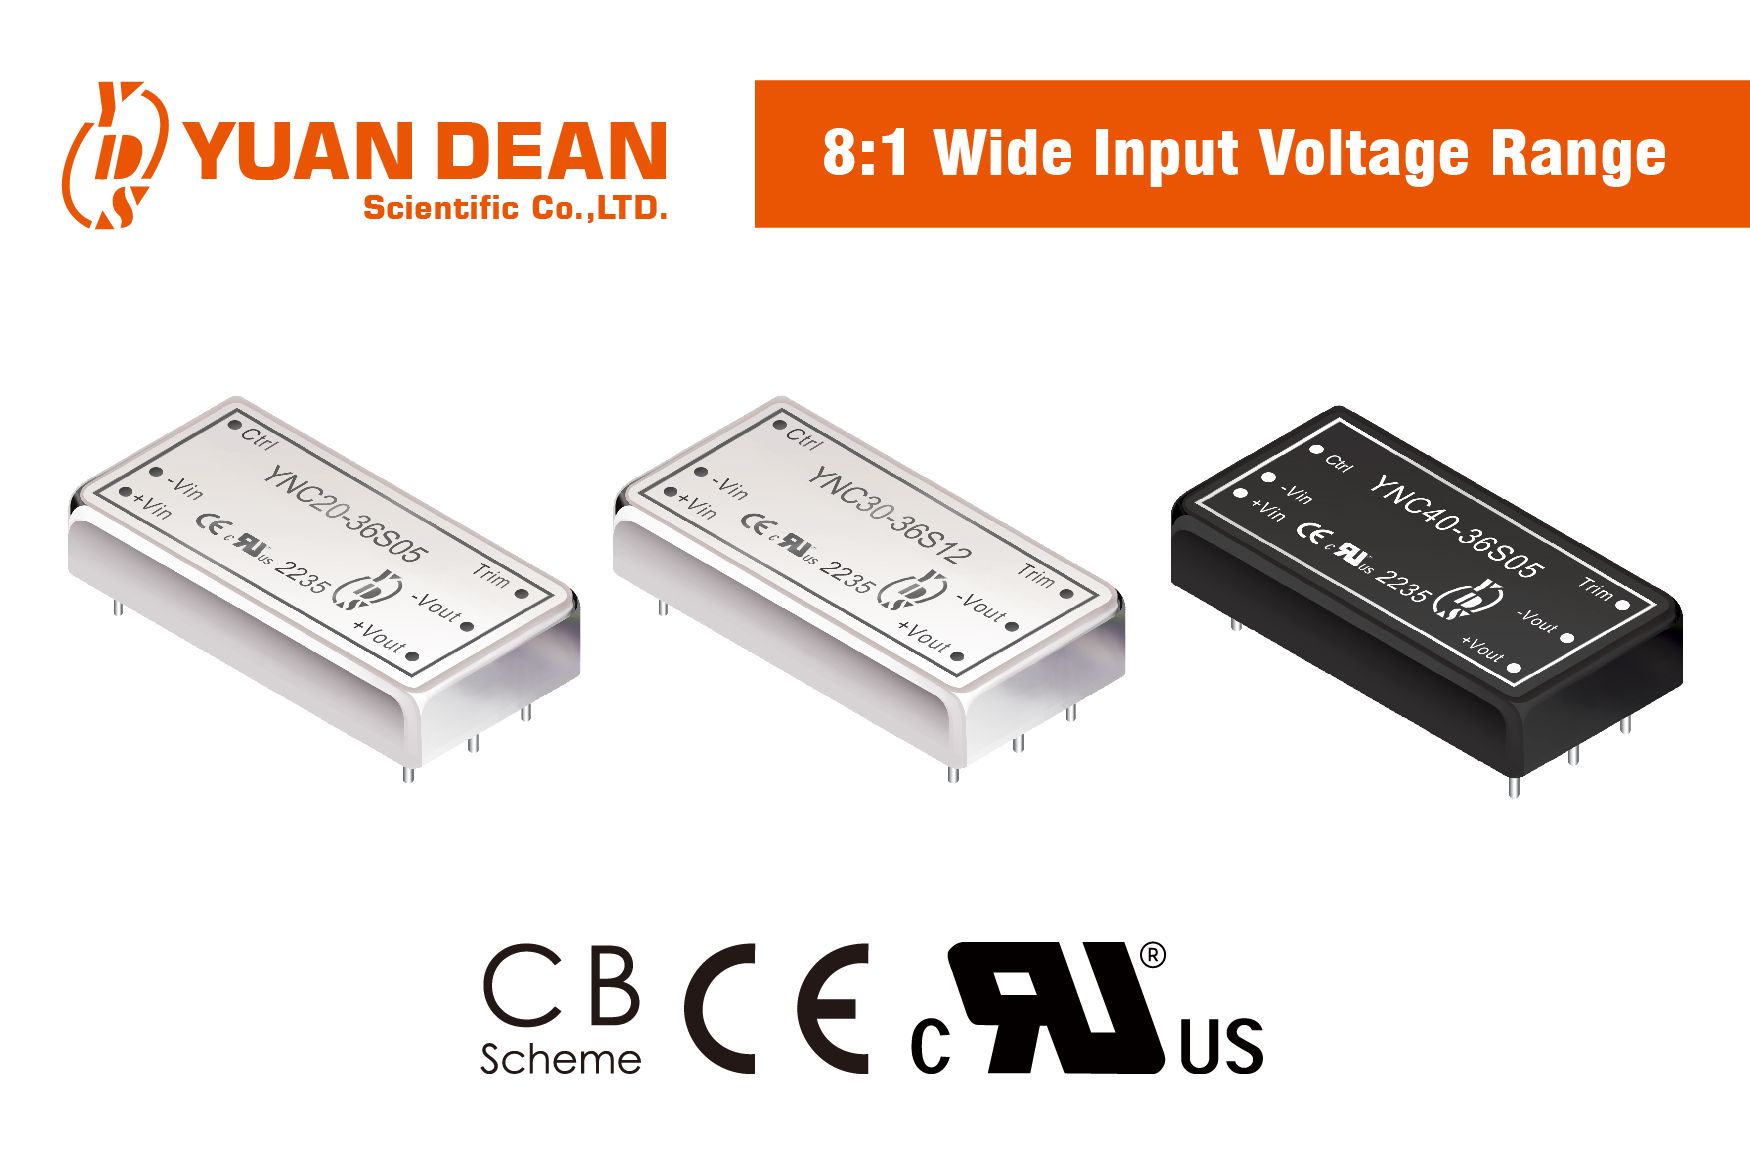 8:1 input voltage range DC-DC converters passed UL, CE and CB approvals